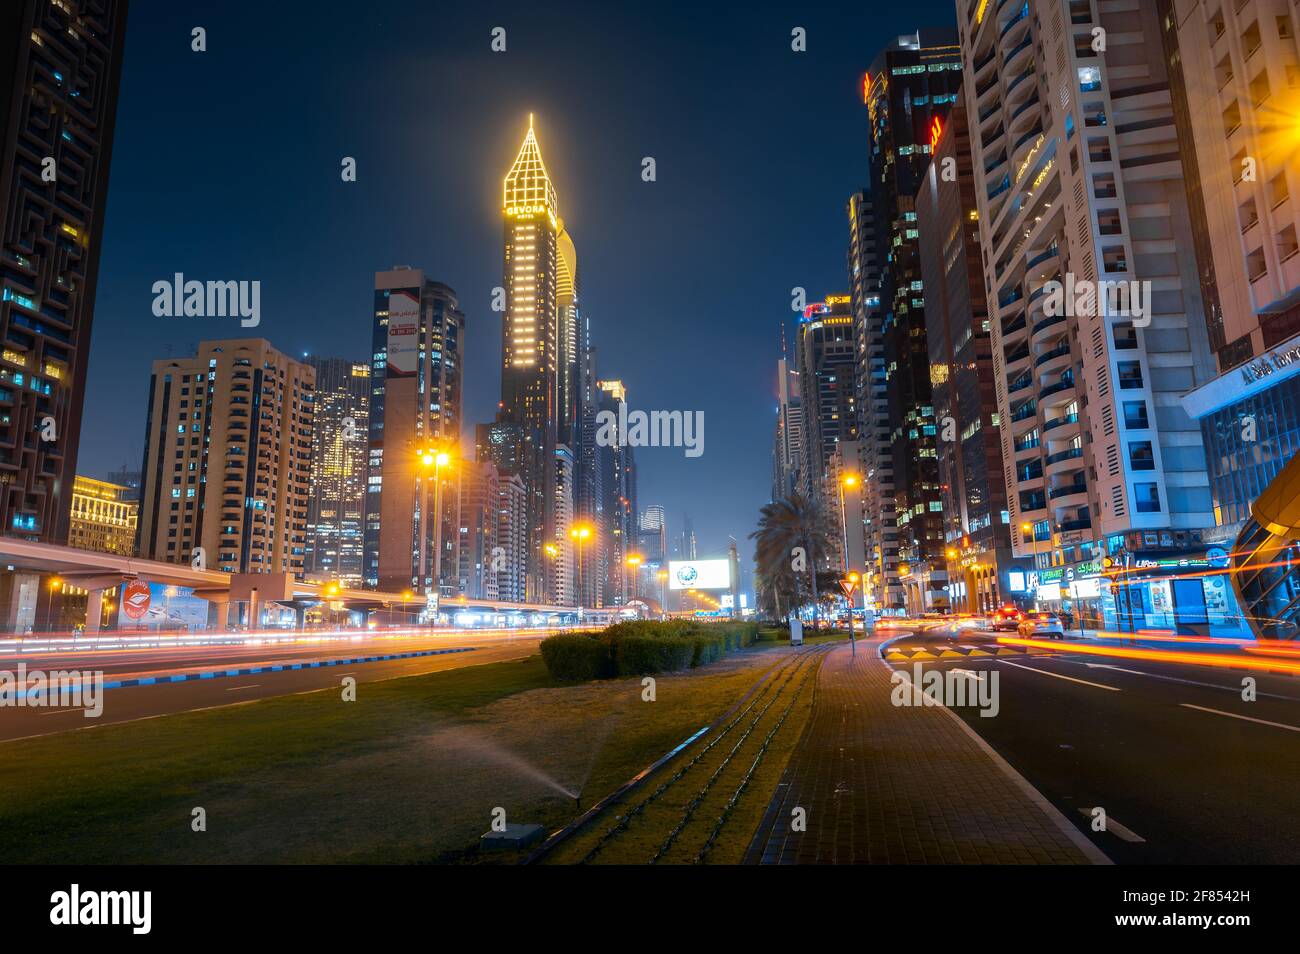 Dubai, United Arab Emirates - March 31, 2021: Downtown Dubai modern skyline above Sheikh Zayed road on of the busiest highways in the UAE at blue hour Stock Photo